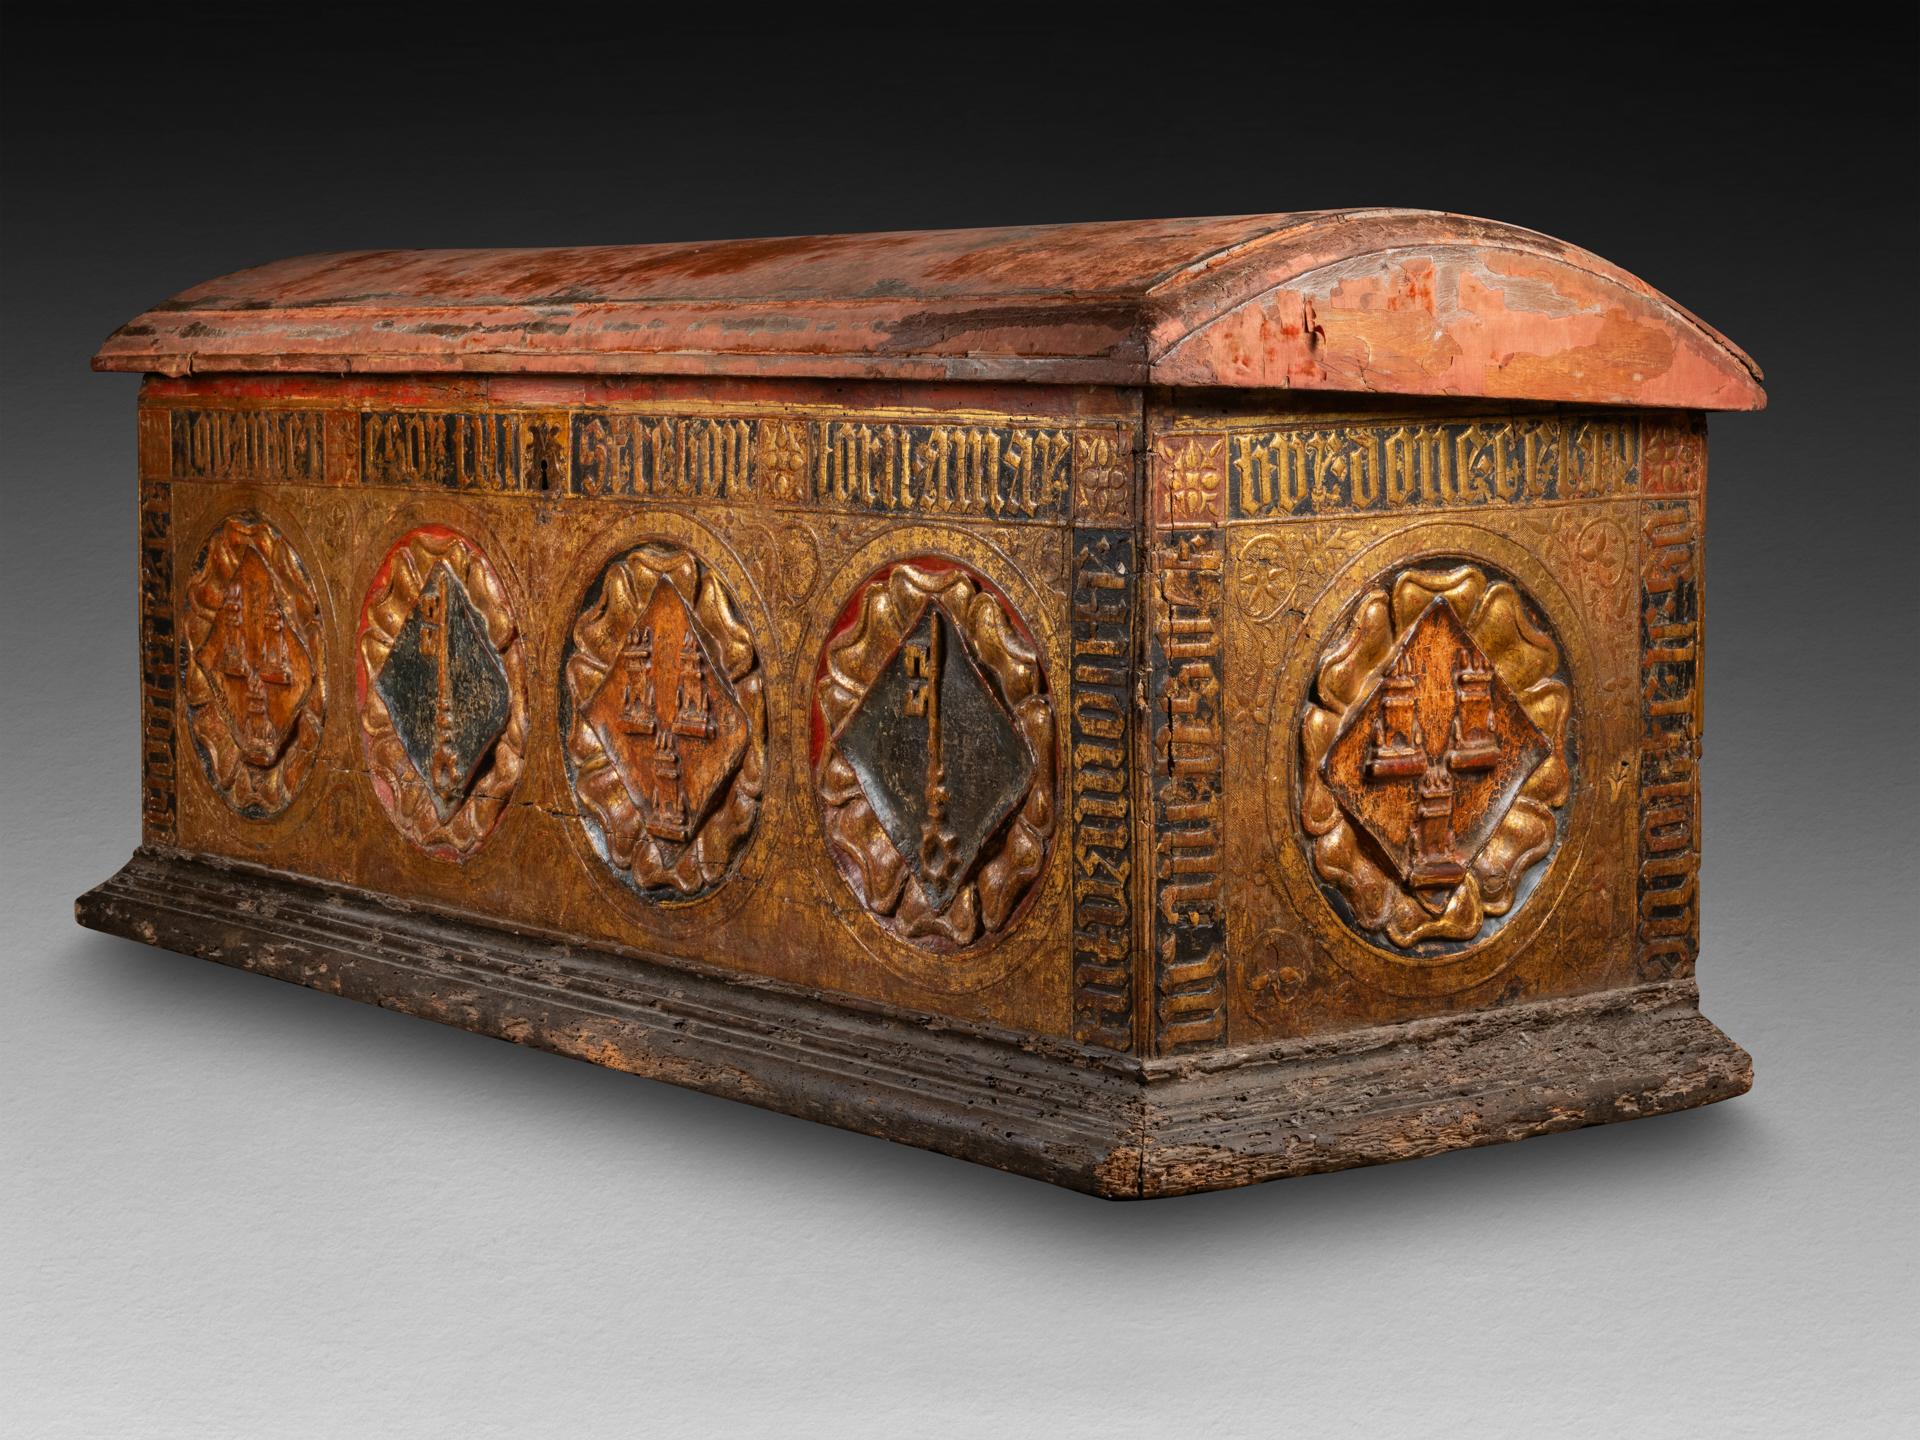 Rare pastiglia marriage chest 
North of Italy, Liguria or Piemonte
First half of 15th century
wood, gesso, partly gilded, form molded and painted
67 x 156 x 63 cm



Provenance :
Private collection Italy since 1980

Richly decorated wooden chest